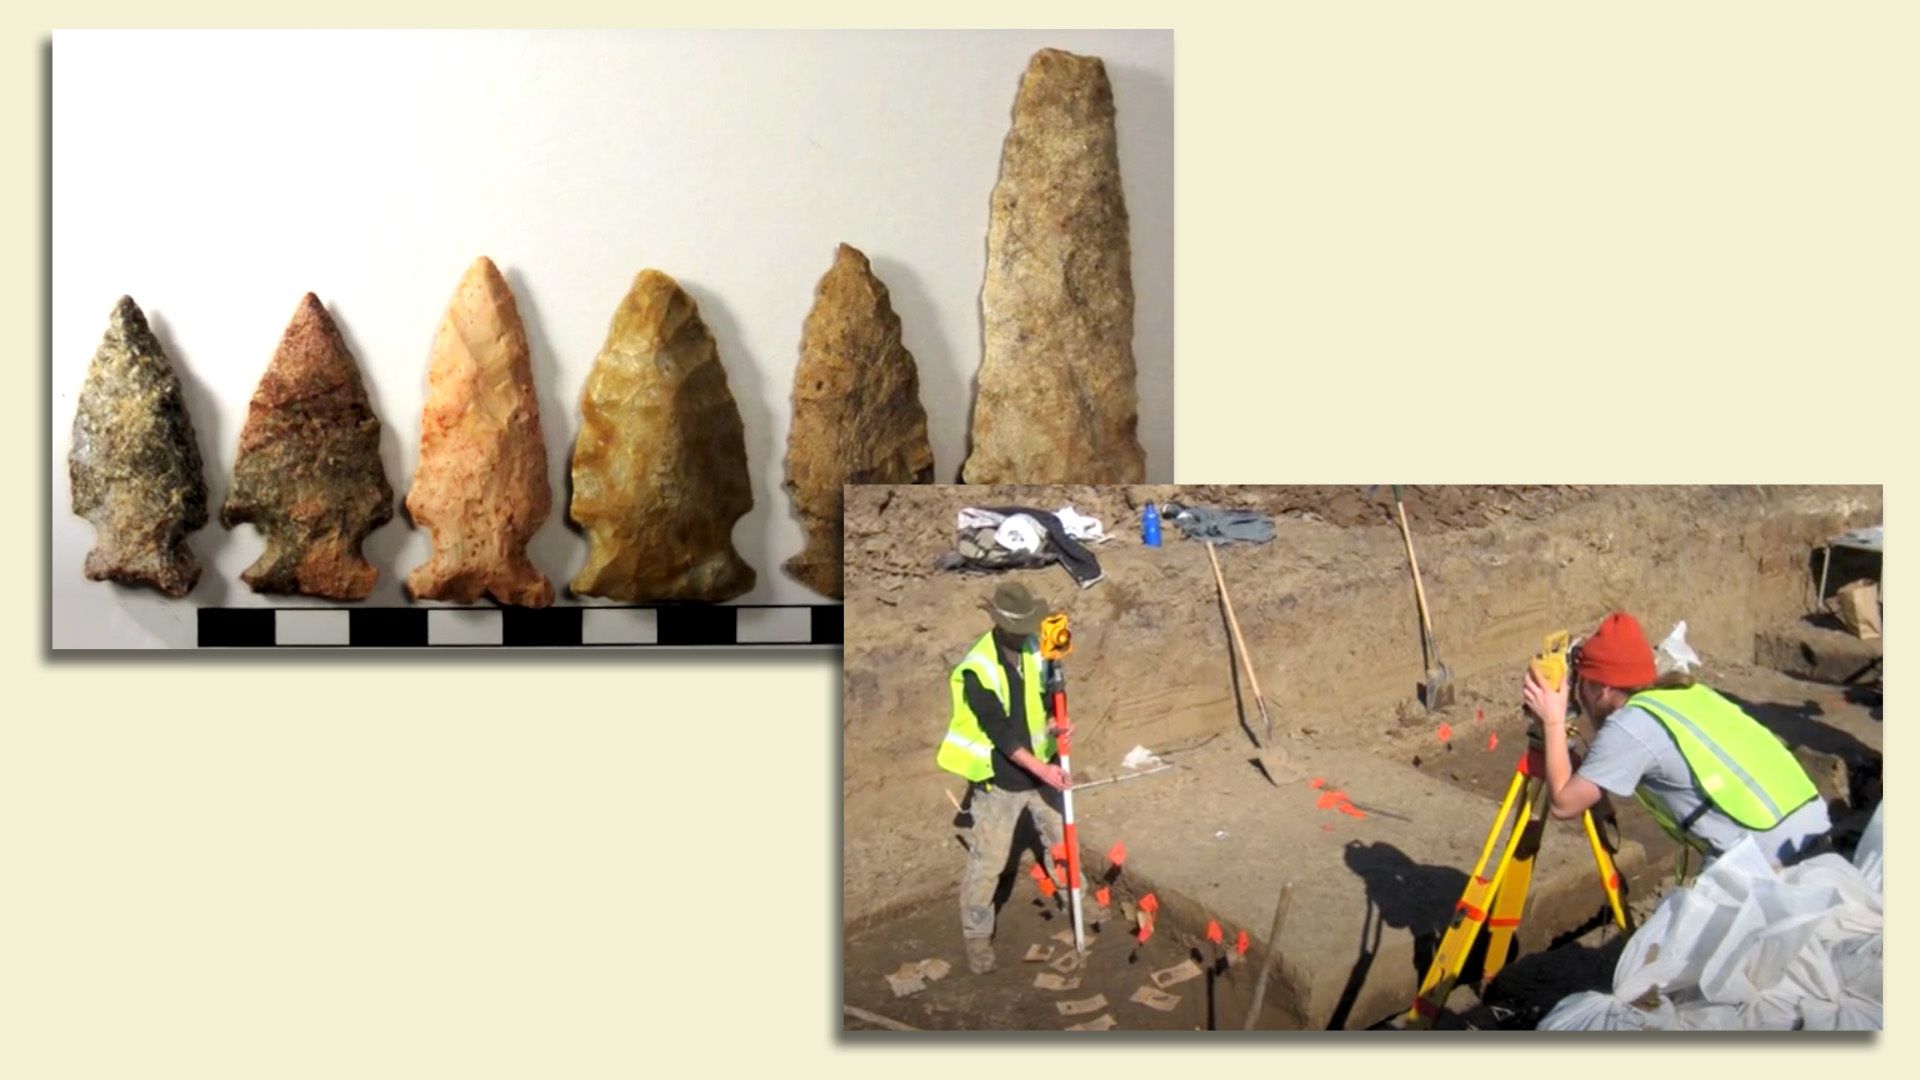 A photo of artifacts discovered in Des Moines in 2010.